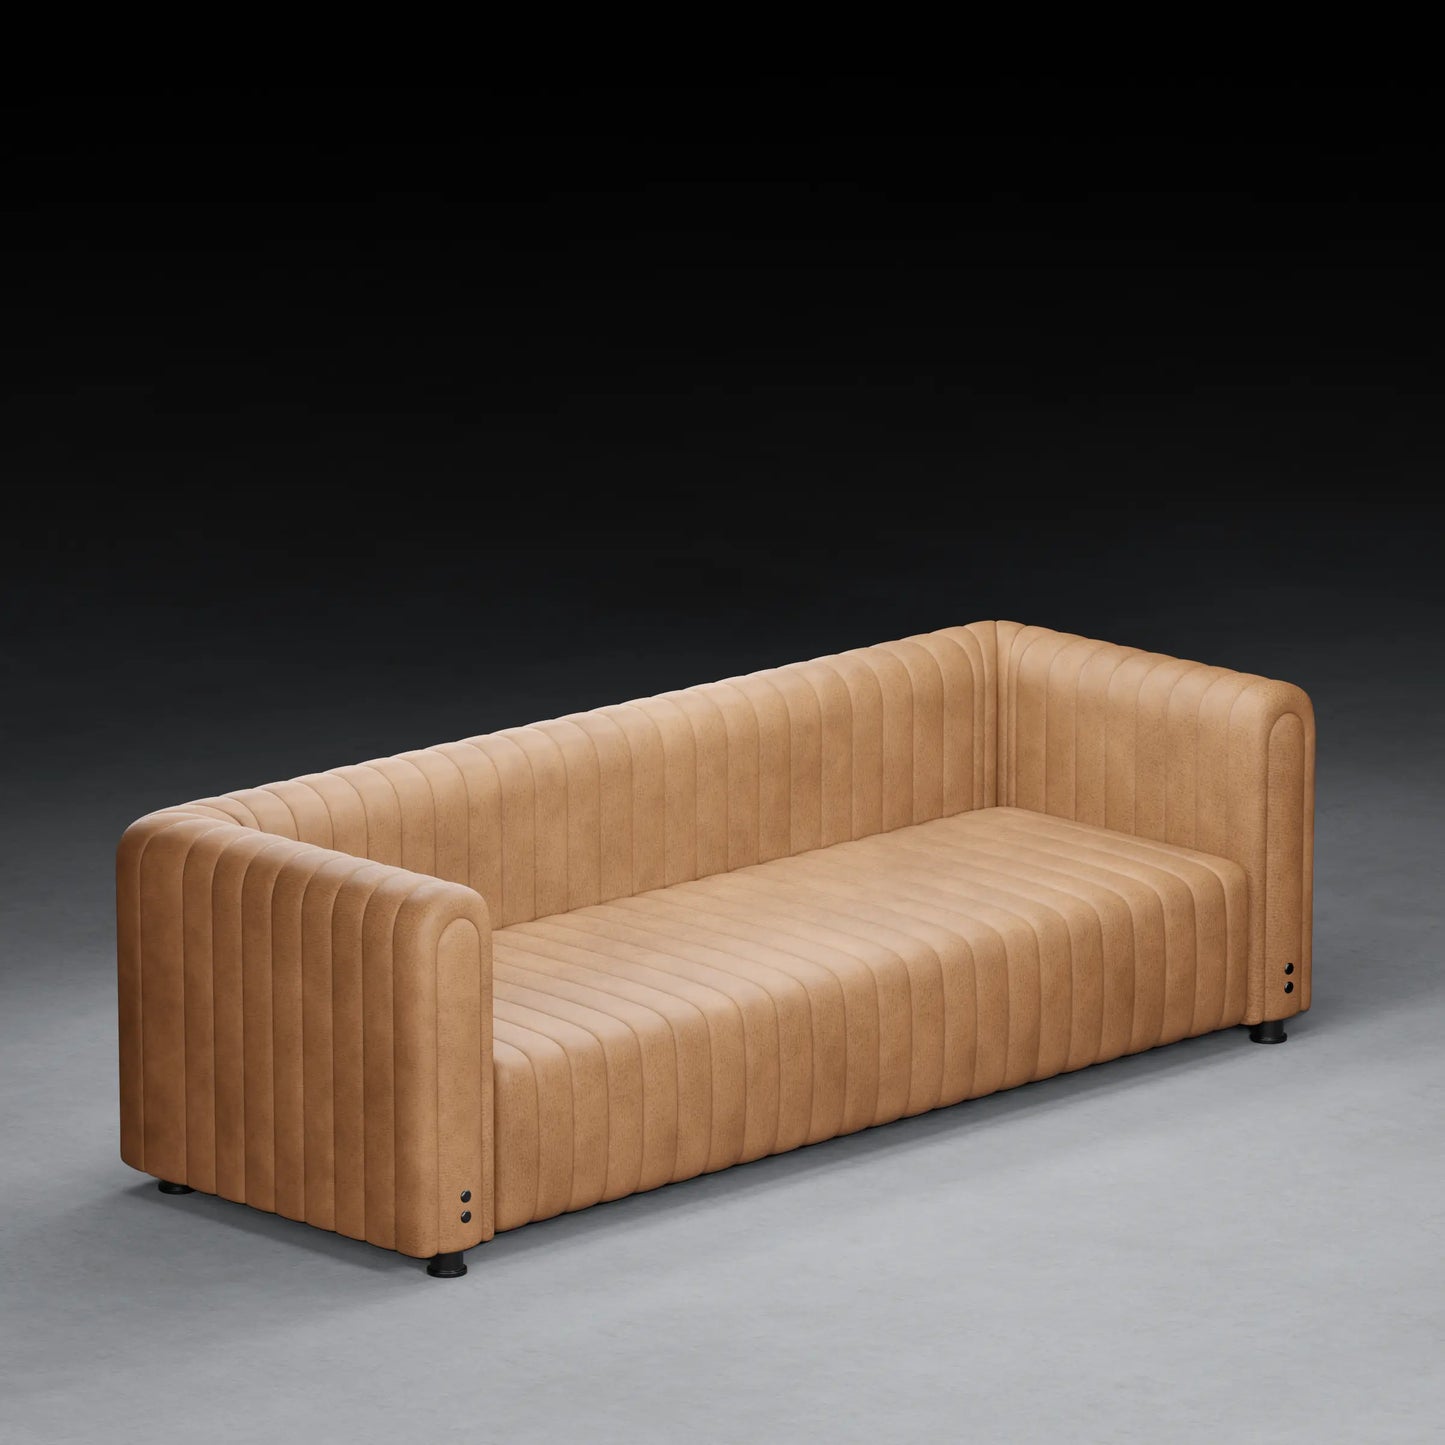 FIG  - XL 3 Seater Couch in Leather Finish | Tan Color